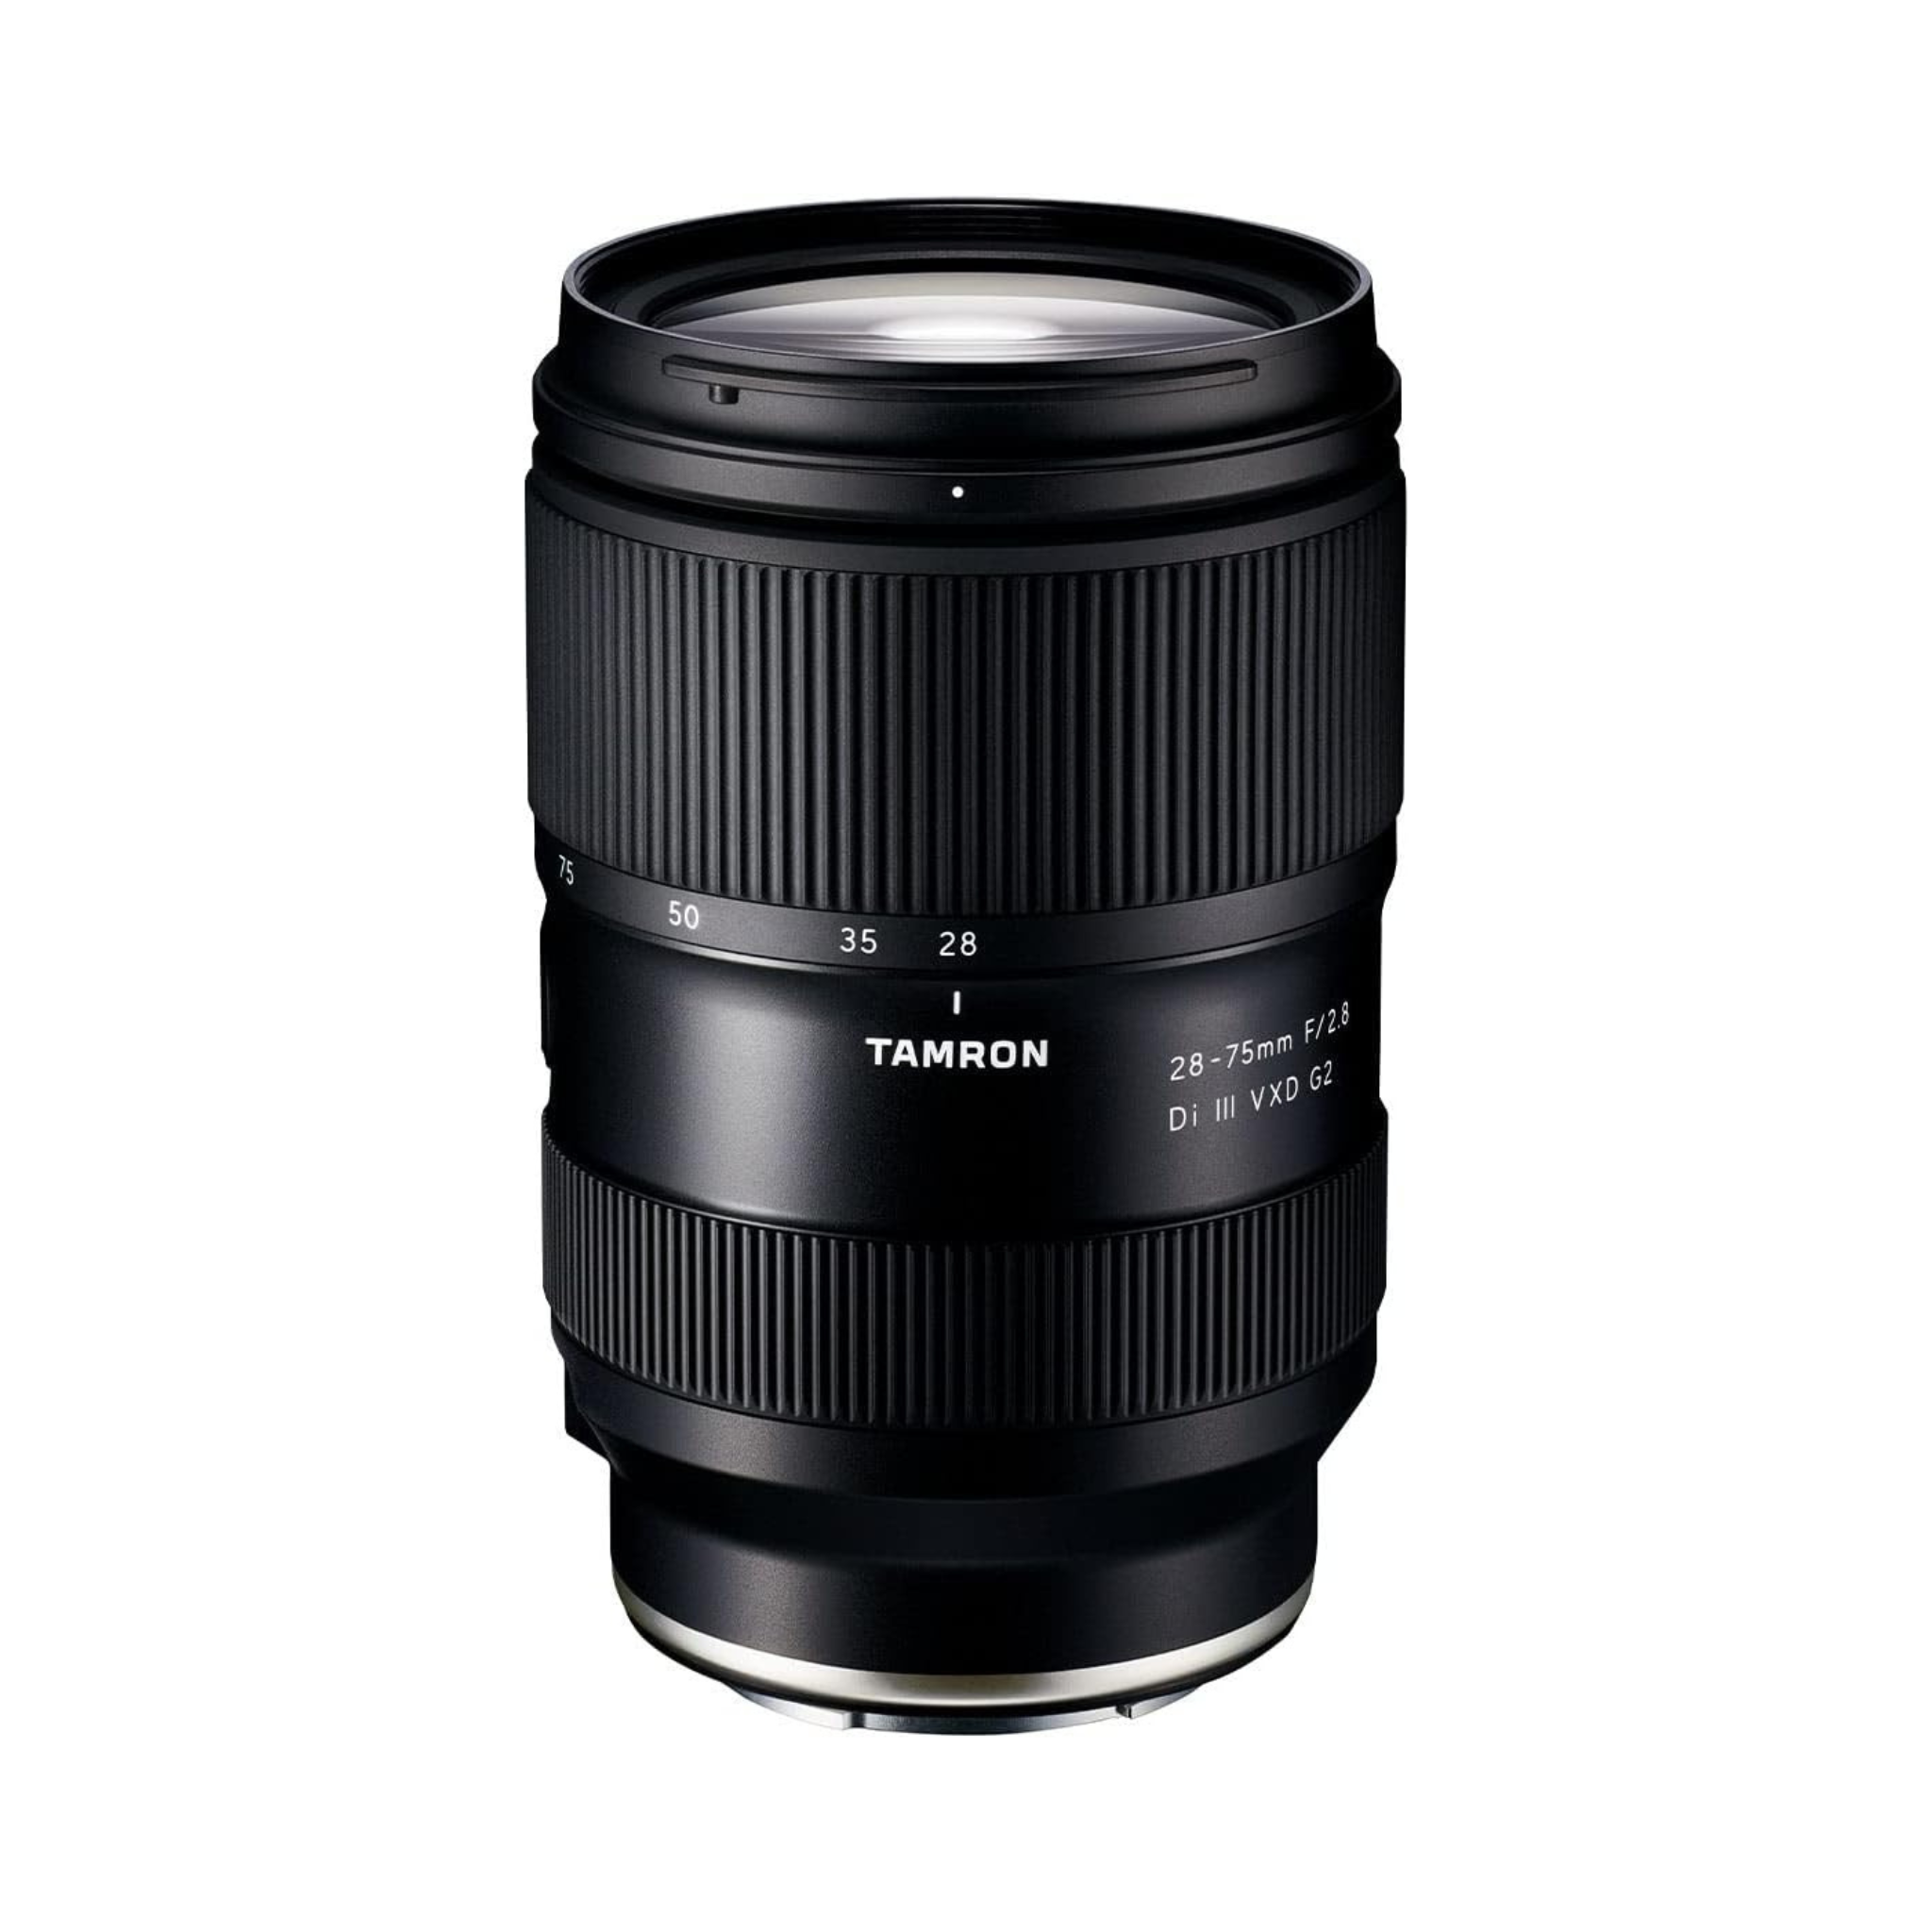 Tamron 28-75mm F/2.8 Di III VXD G2 Standard Zoom Lens for Sony E-Mount